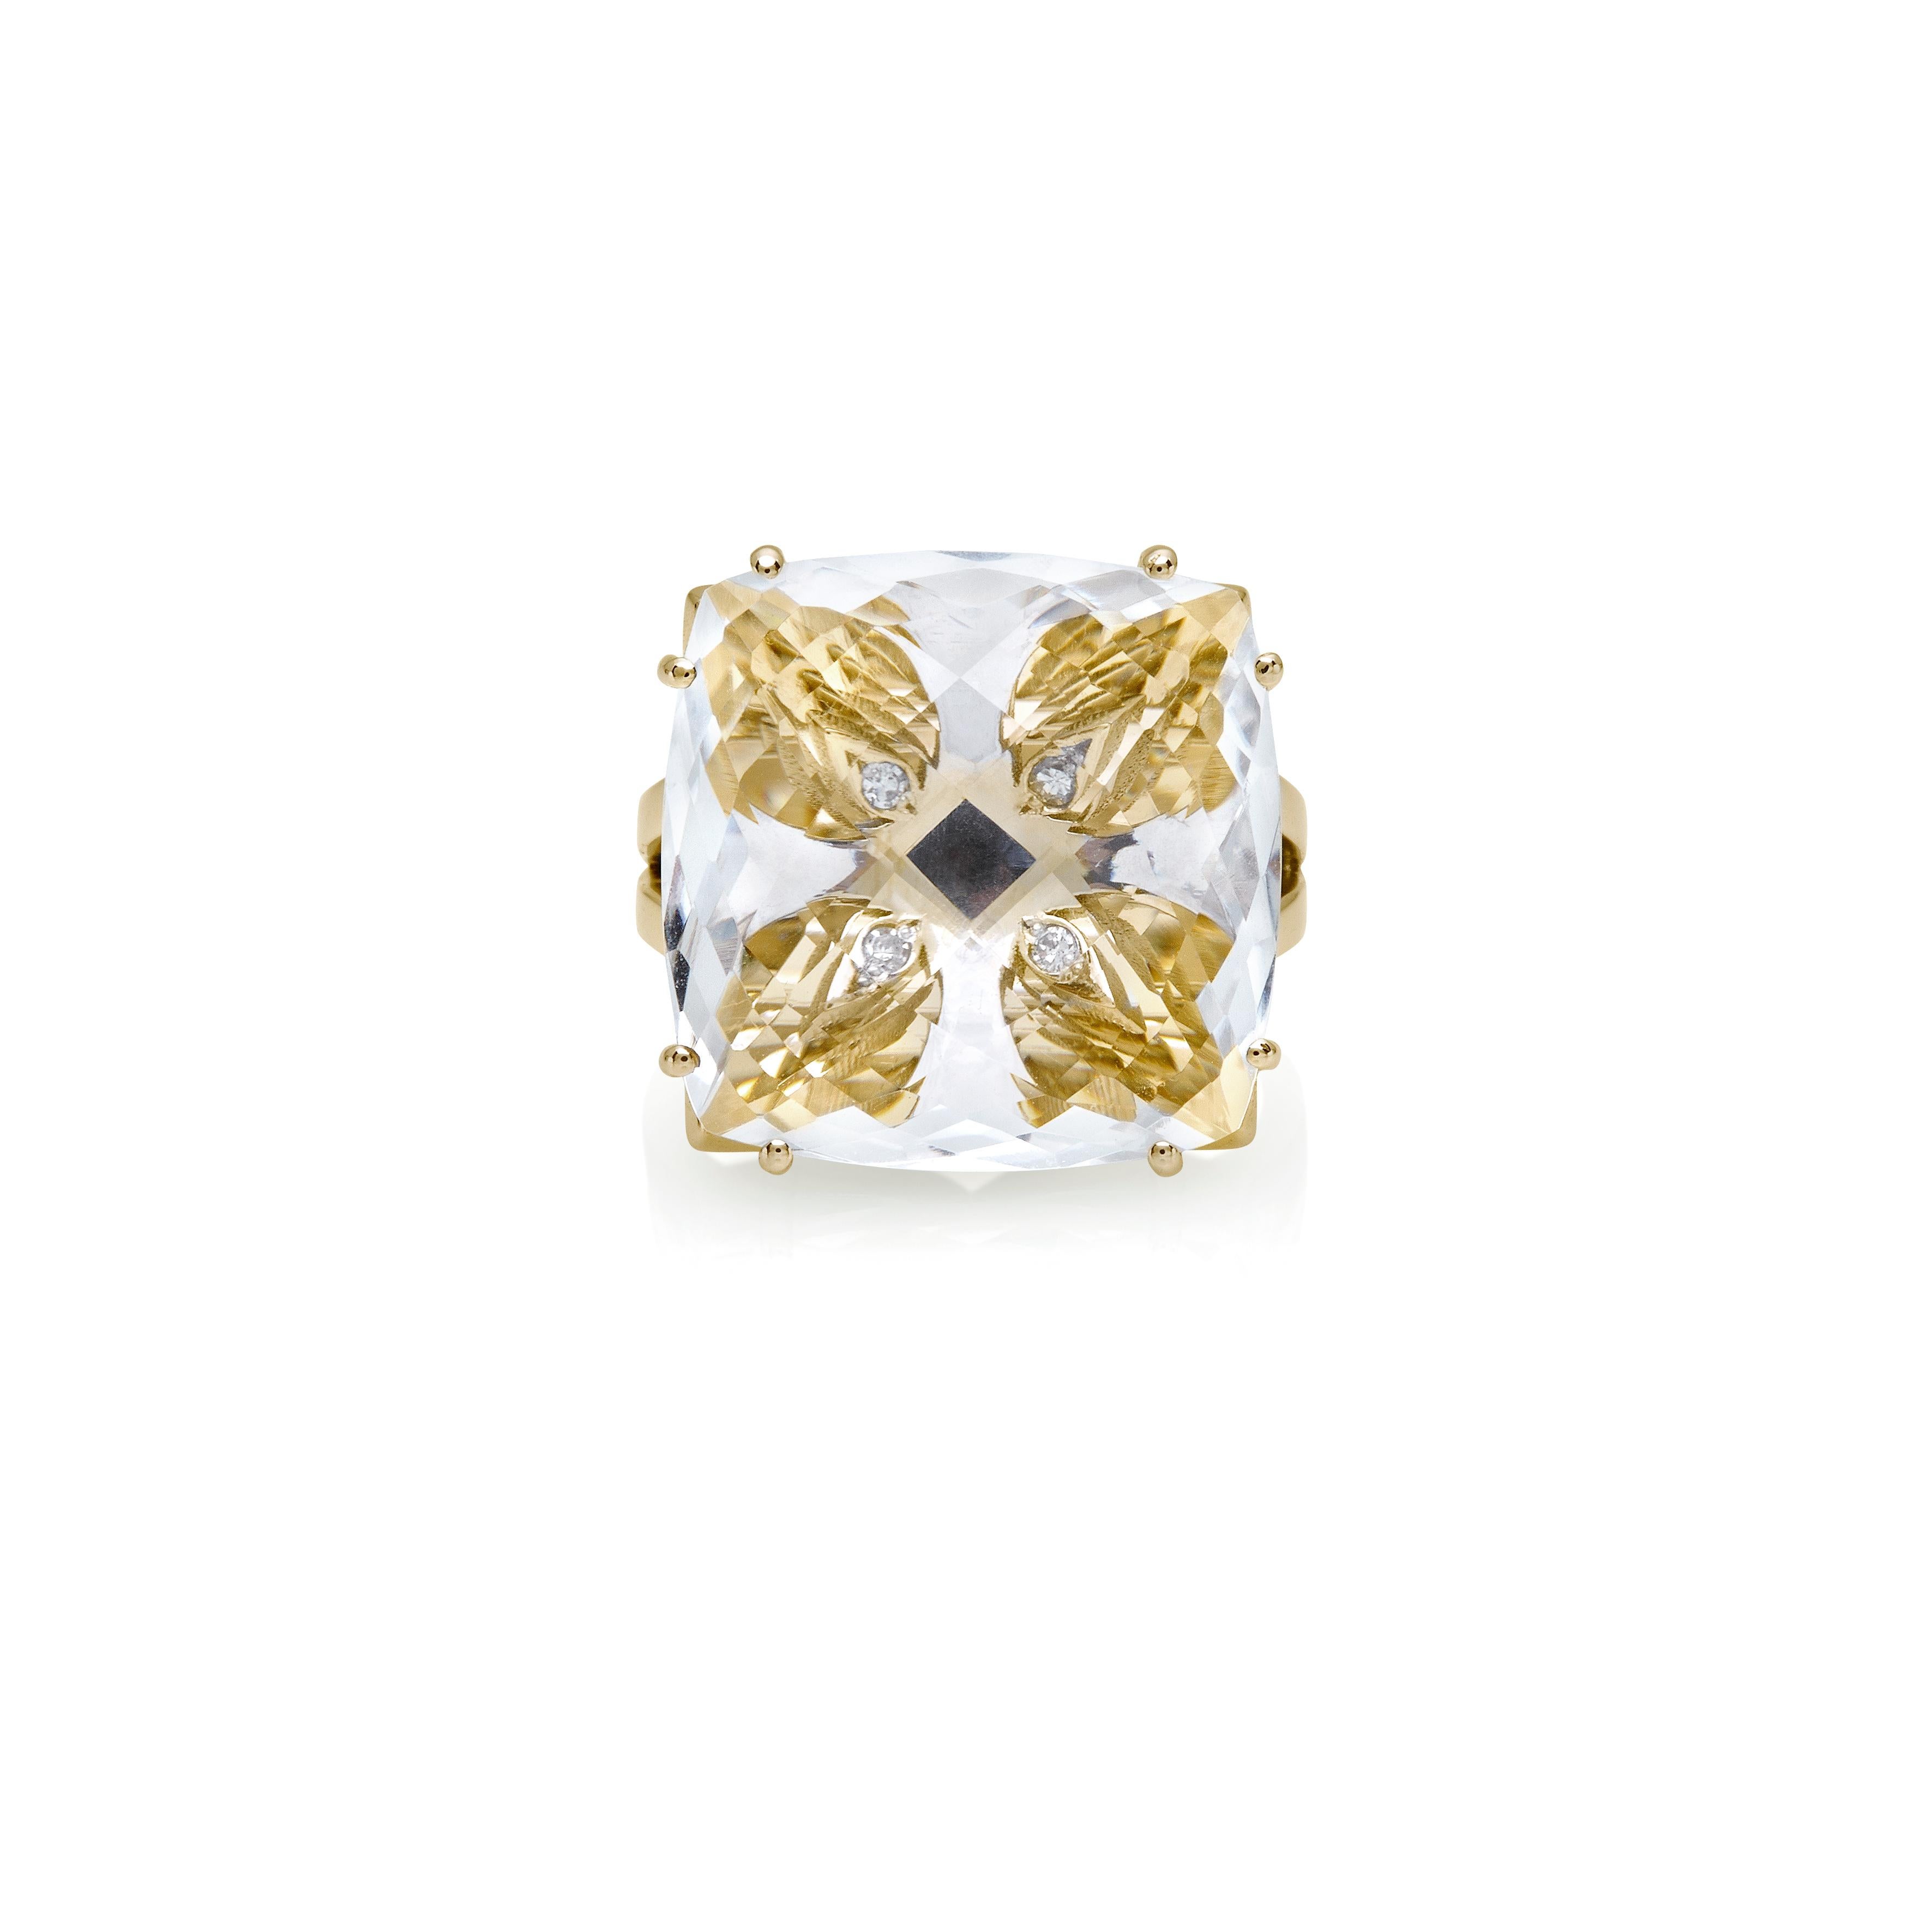 18kt Yellow Gold Clear Royal Quartz ring 19.00 carat with Diamonds 0,08 ct Chakral Activator Ring by Nicofilimon.
An exquisite handcrafted 18kt gold with a royal quartz cushion briolette cut & diamonds ring that defines elegance and refined